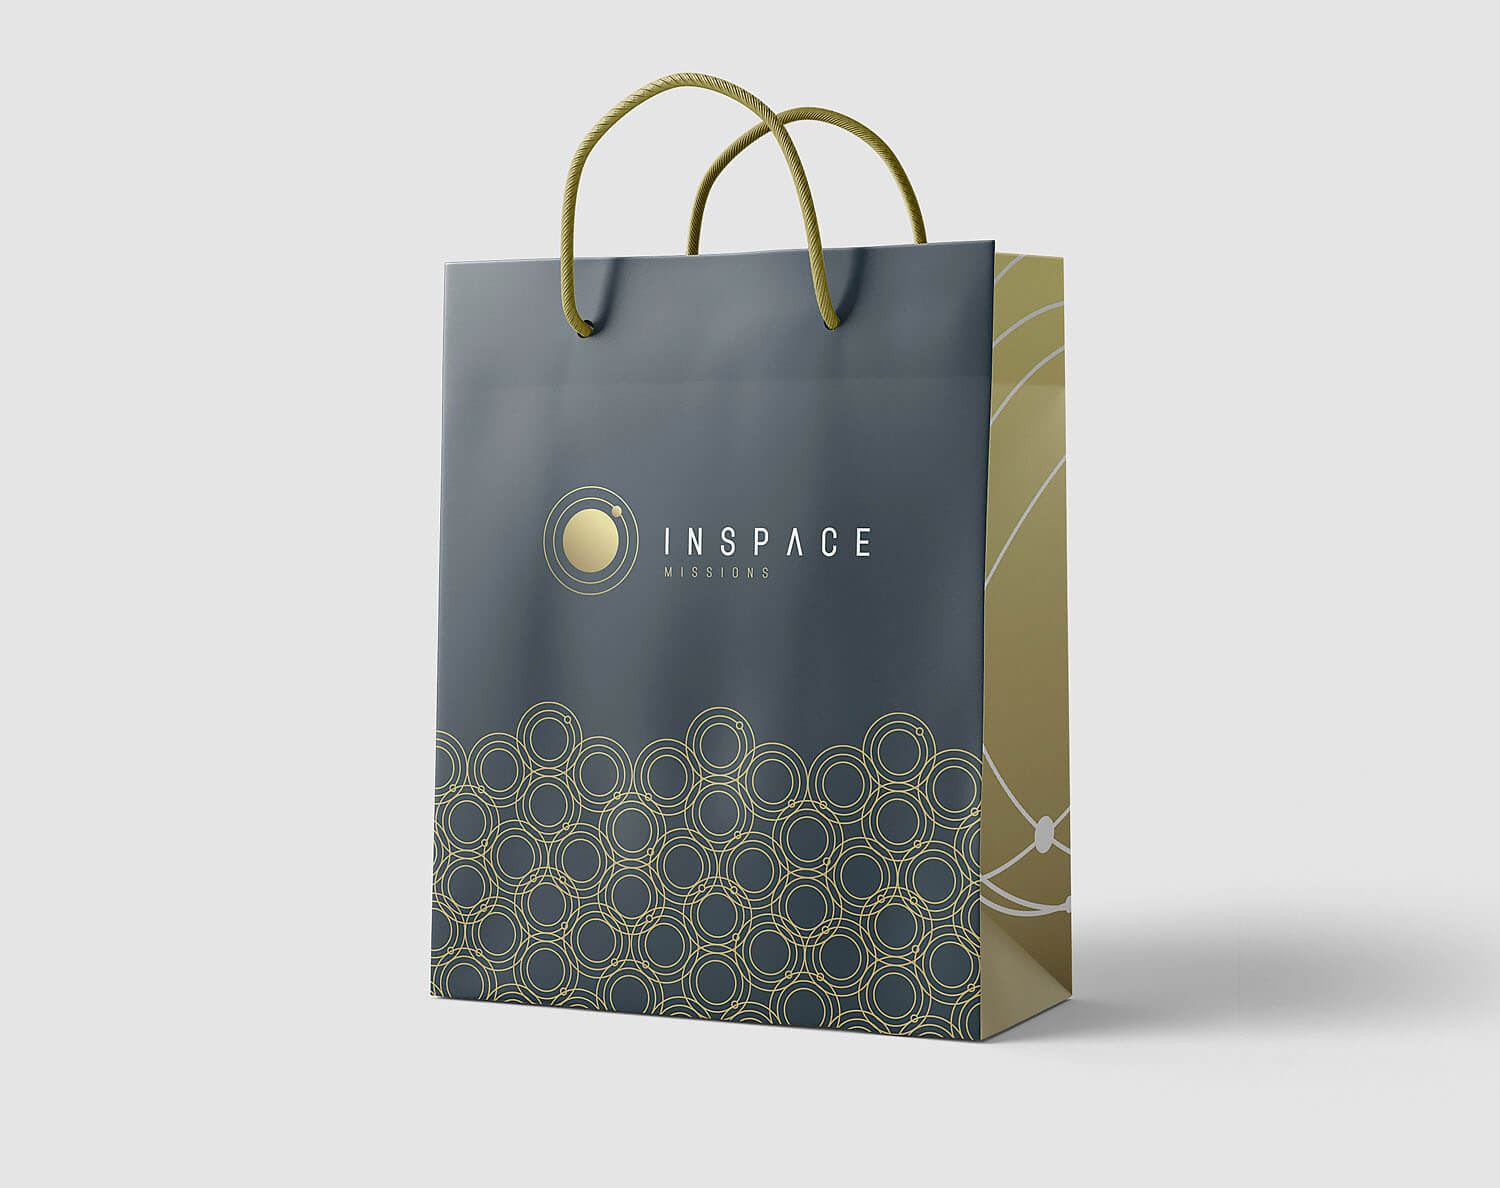 Branded exhibition paper bag for In-Space Missions Design Agency in Hampshire